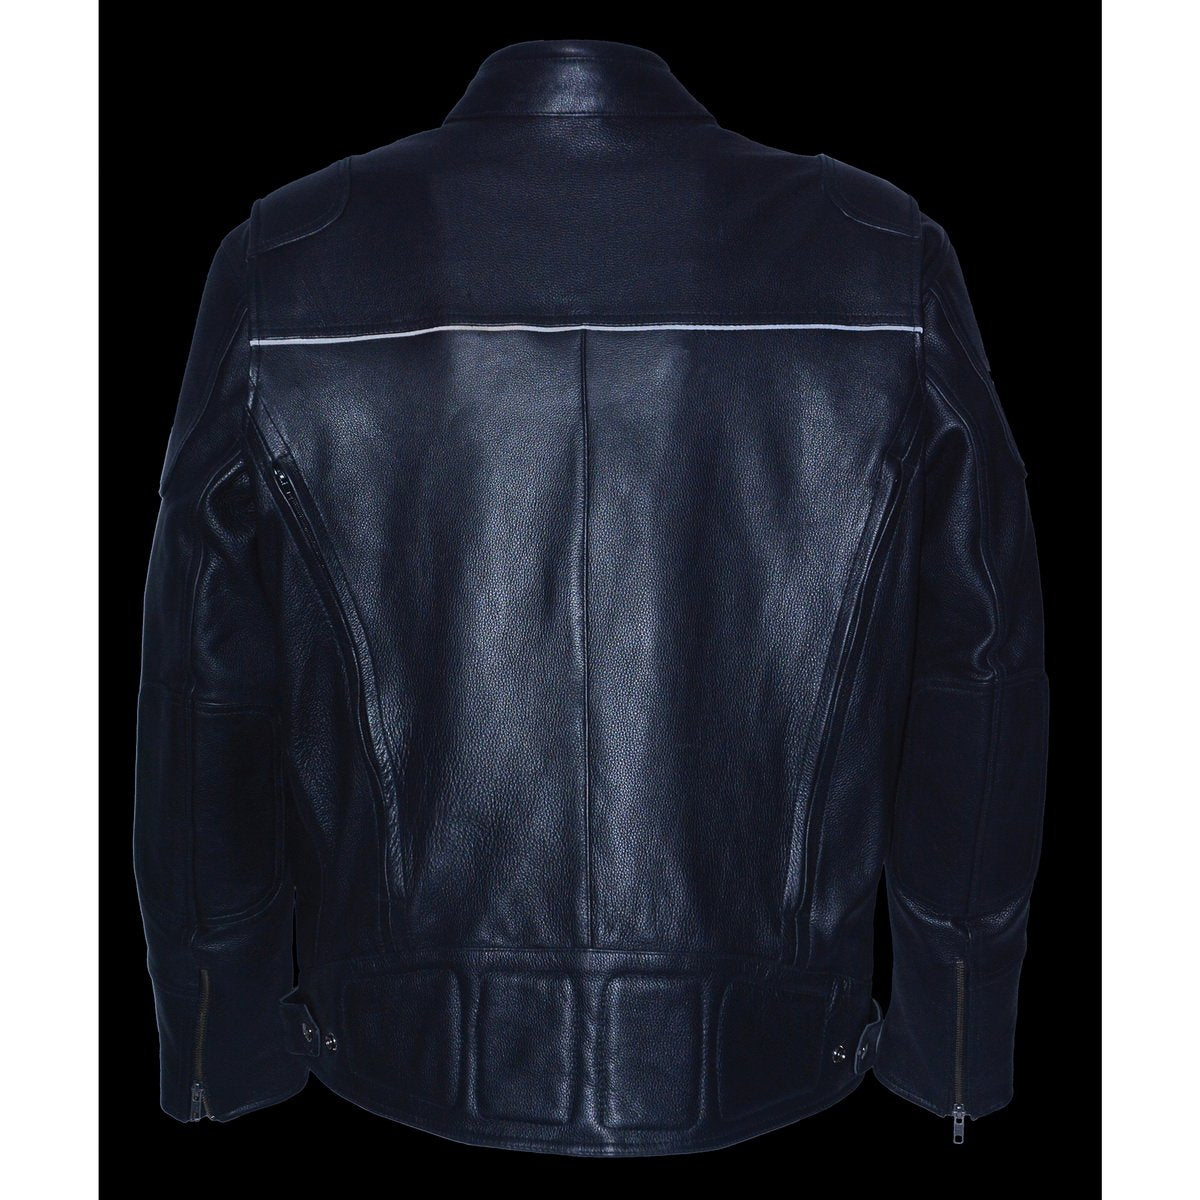 Milwaukee Leather MLM1513SET Men's Black 'Heated' Leather Vented Scooter Jacket (Battery Pack Included)